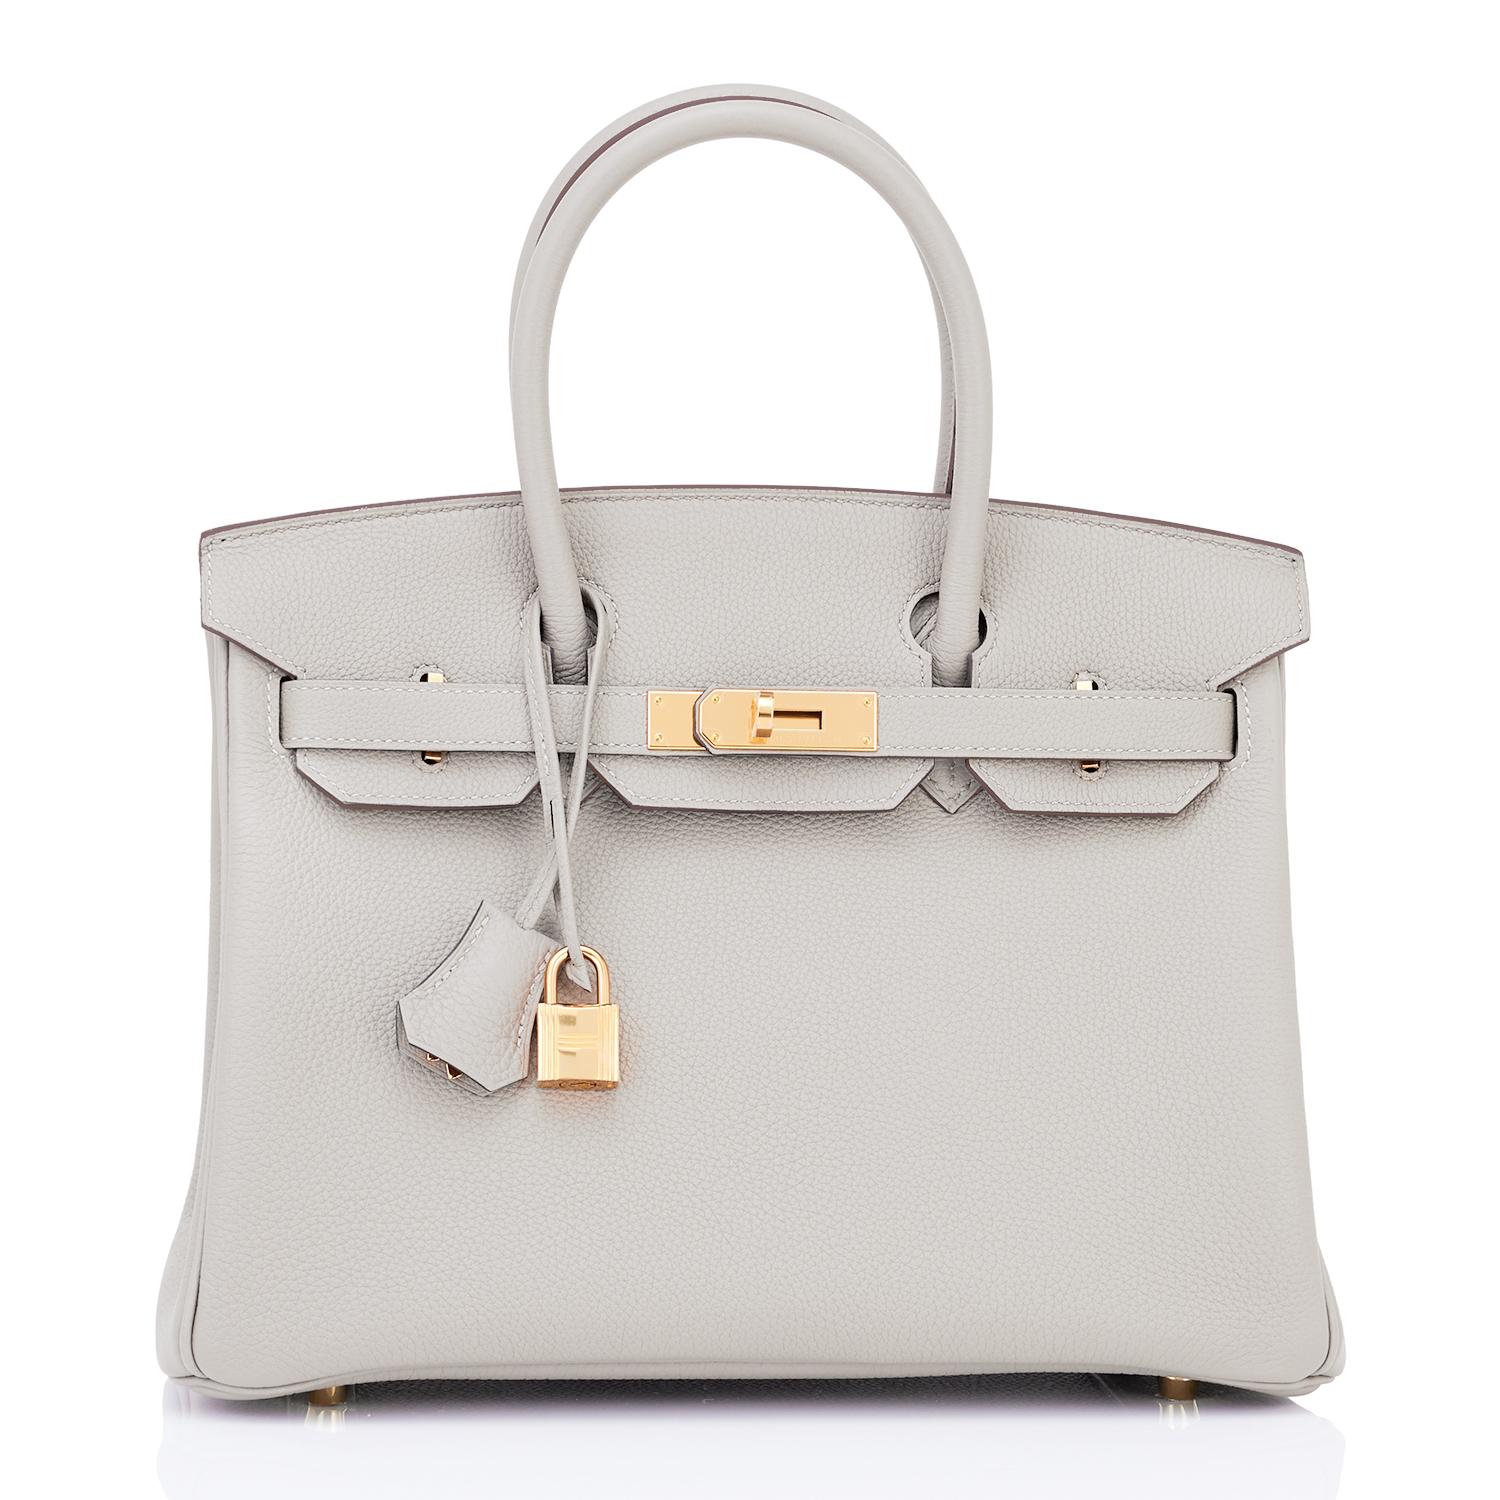 Hermes Birkin 30cm Gris Perle Togo Bag Gold Hardware Pearl Gray  In New Condition For Sale In New York, NY